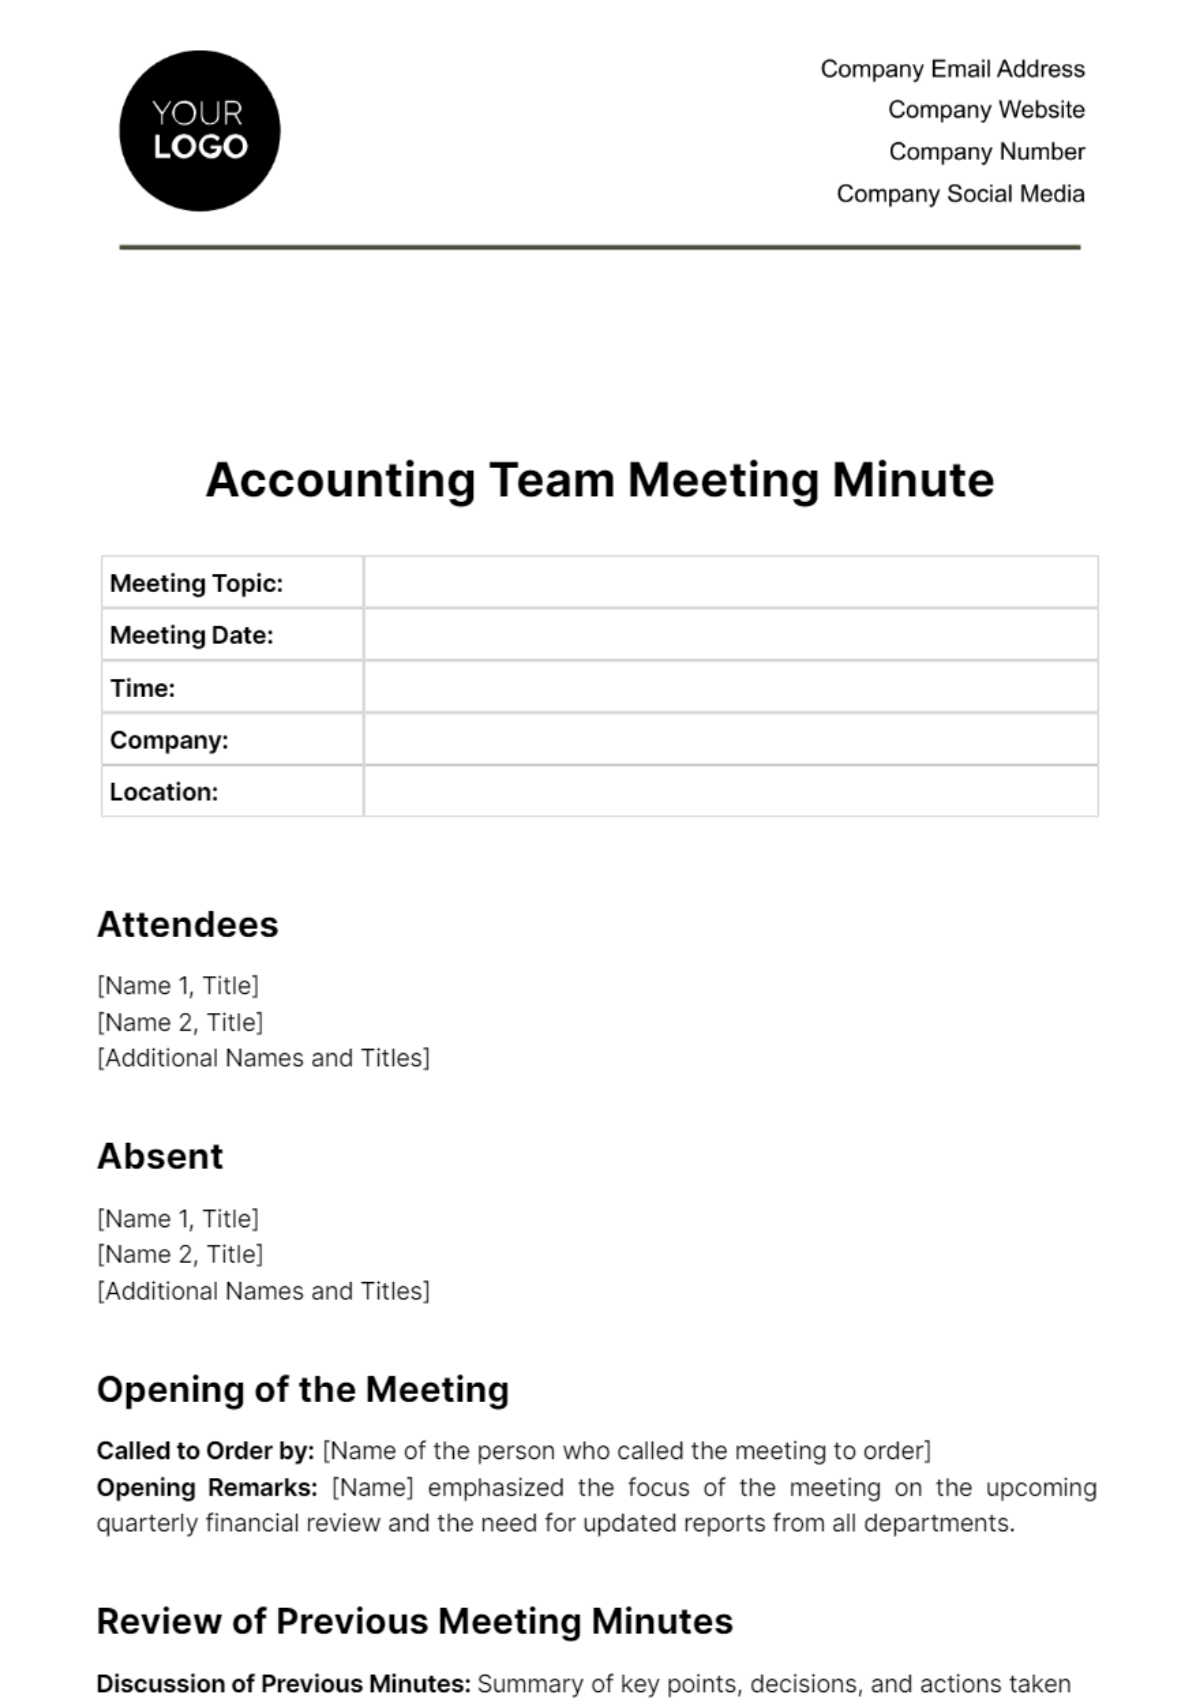 Accounting Team Meeting Minute Template